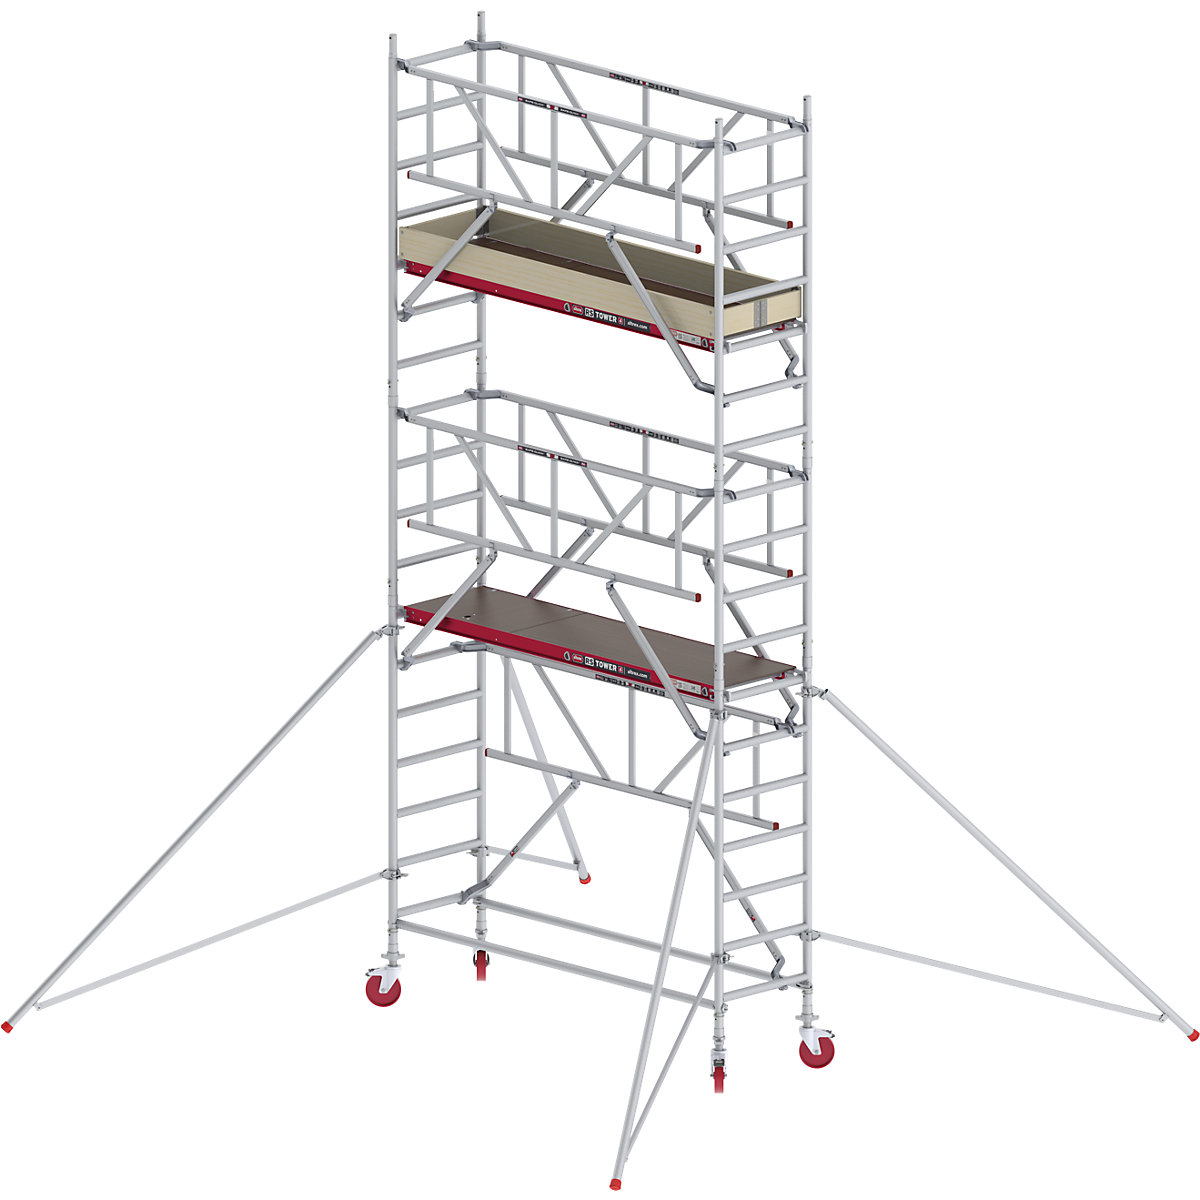 RS TOWER 41 slim mobile access tower with Safe-Quick® – Altrex, wooden platform, length 1.85 m, working height 6.20 m-2